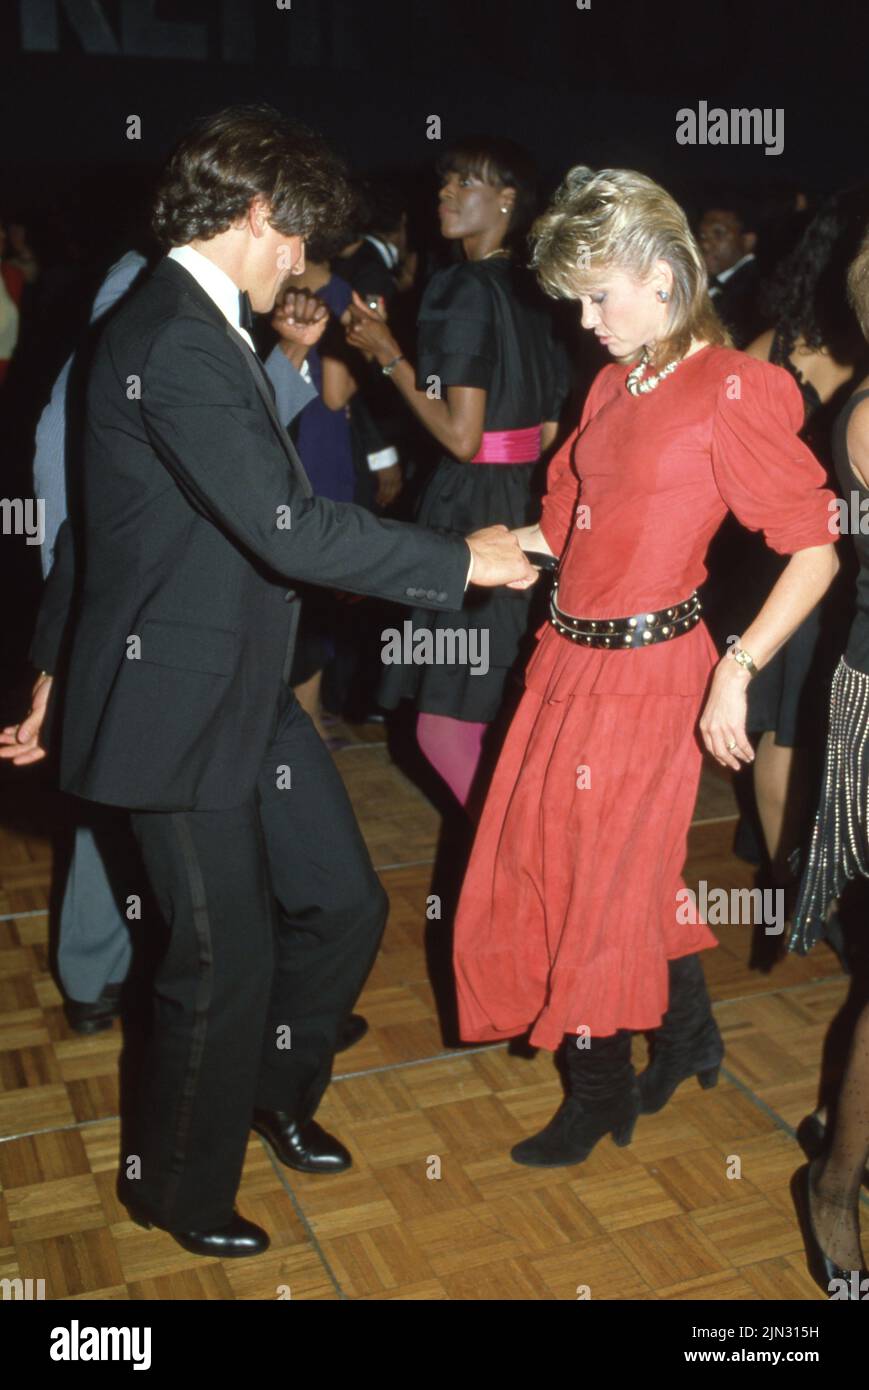 FILE PICS: Olivia Newton-John 1948-2022. **FILE PHOTO** Olivia Newton-John Has Passed Away. CULVER CITY, CA - MARCH 20: Singer Olivia Newton-John and Matt Lattanzi at the 'Dreamgirls' Opening Night Party on March 20, 1983 at TVC Studios in Culver City. Credit: Ralph Dominguez/MediaPunch Credit: MediaPunch Inc/Alamy Live News Stock Photo